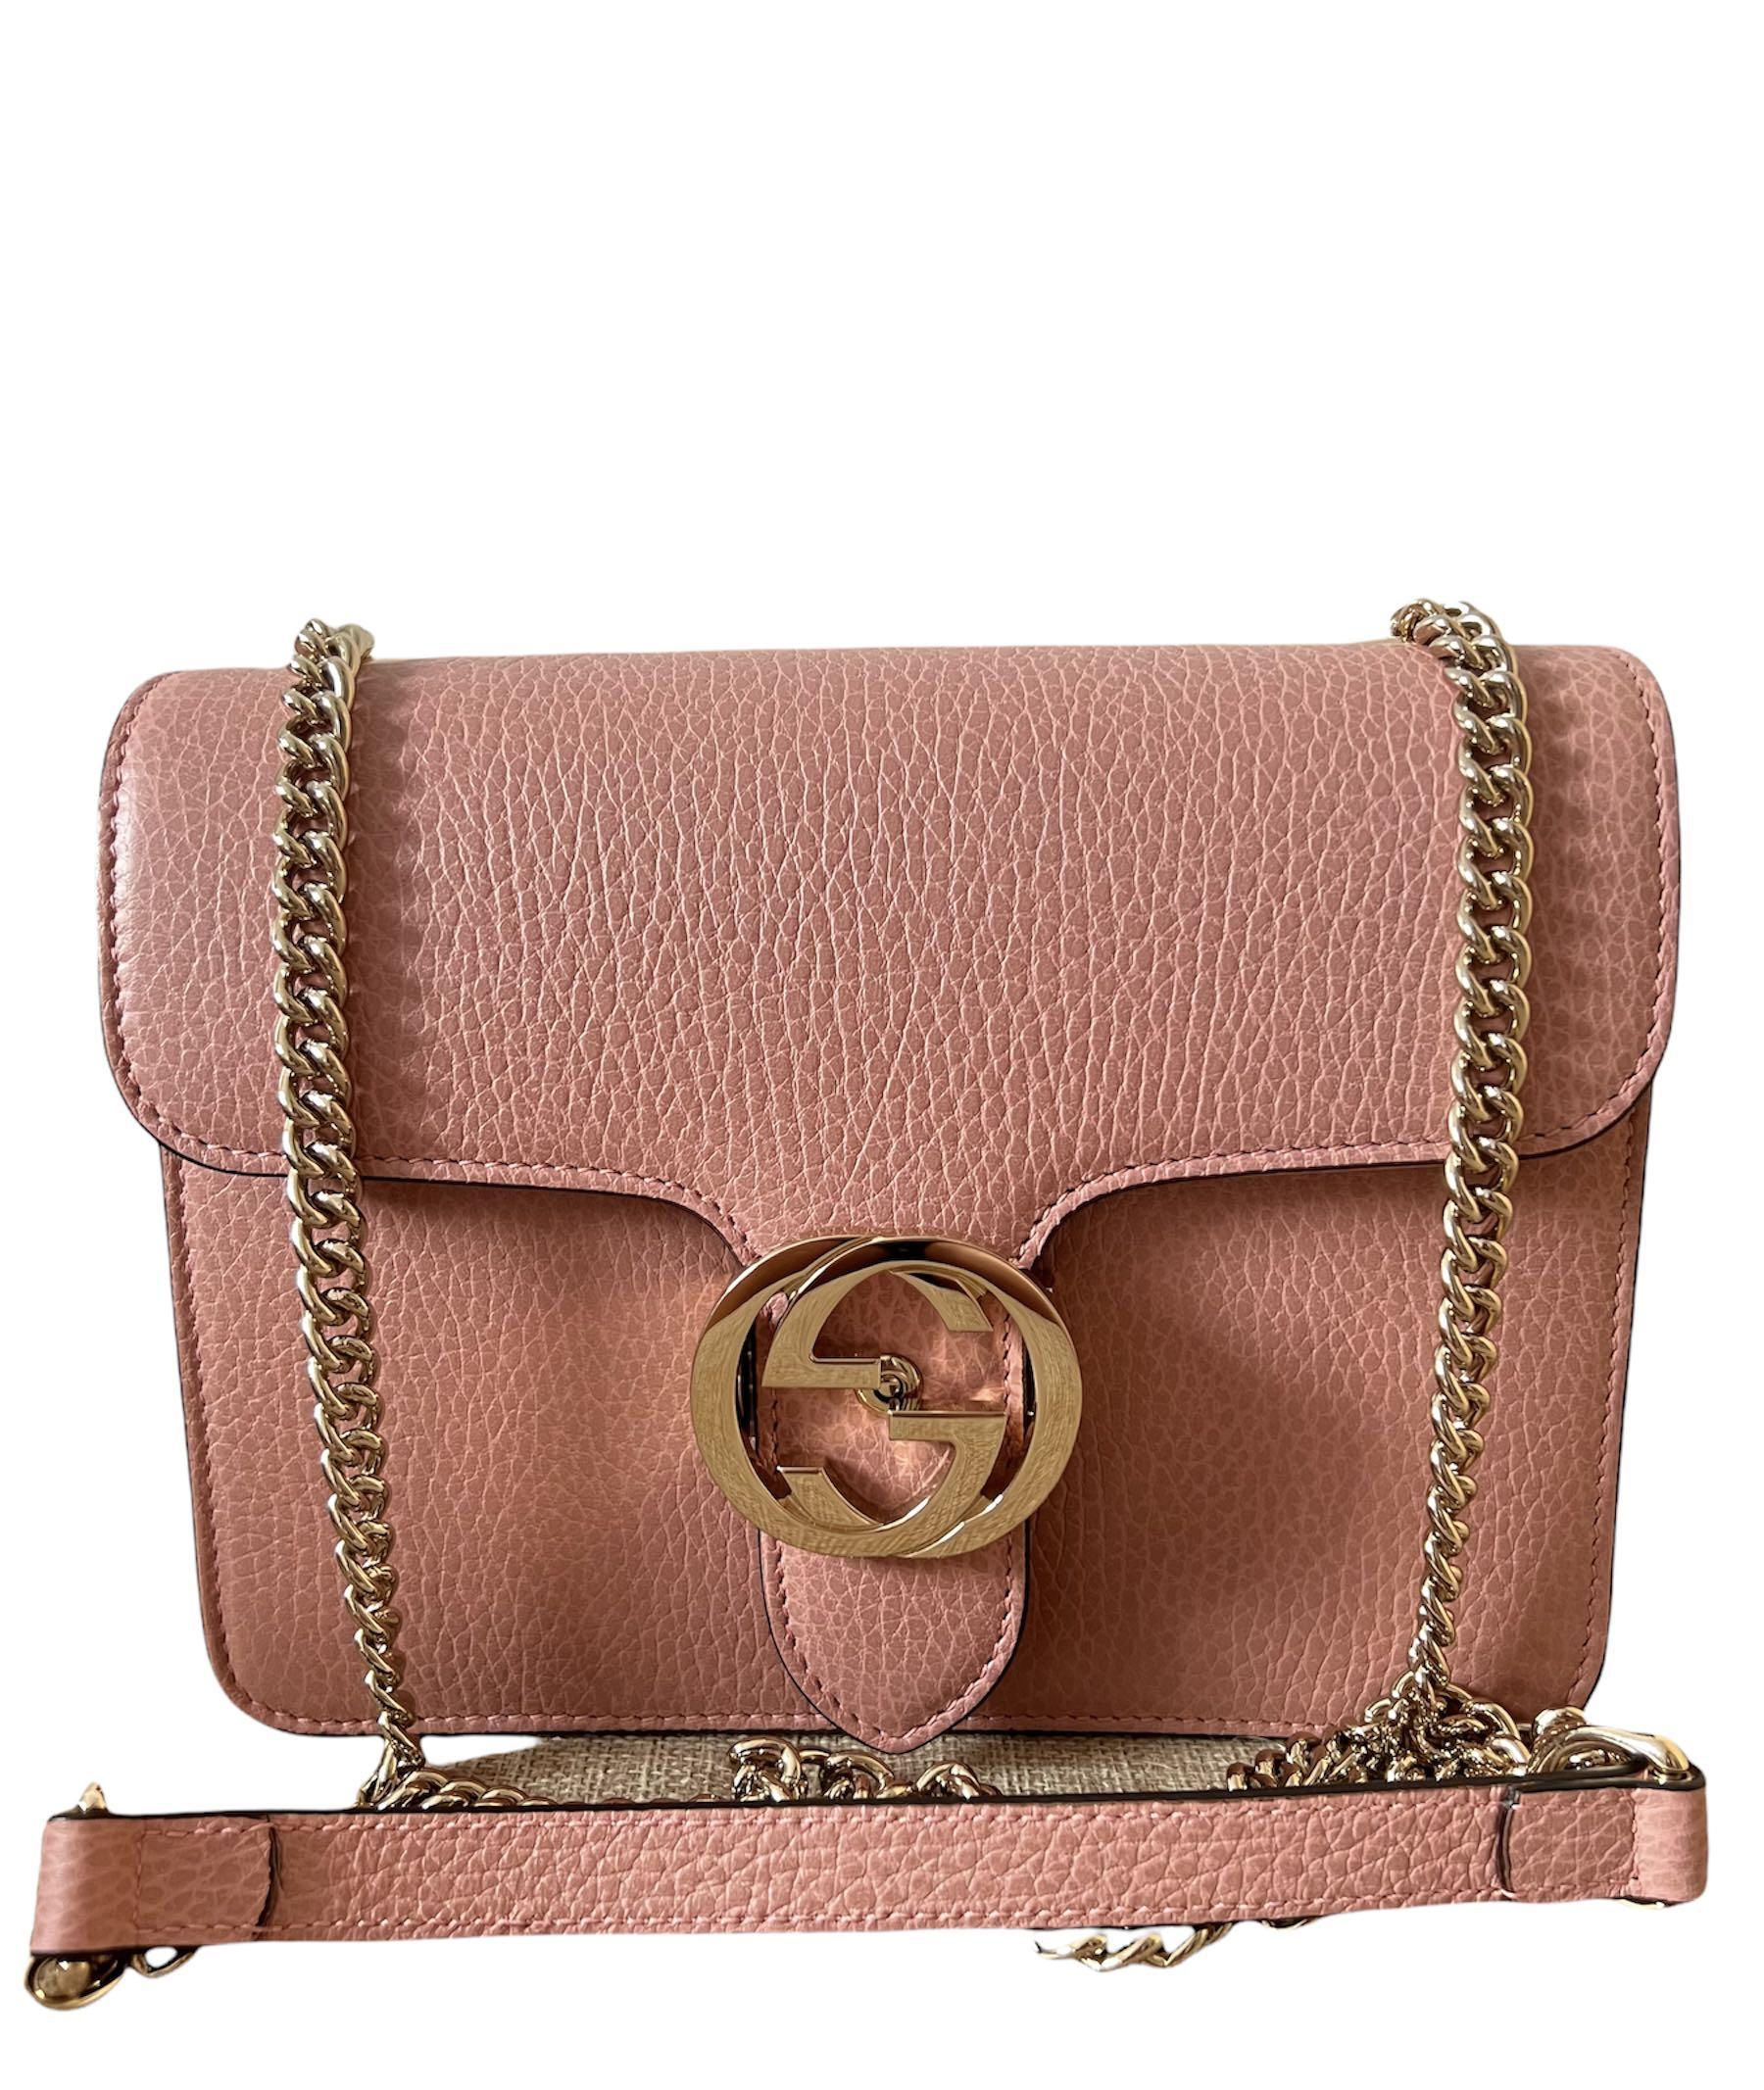 NWT Gucci Interlocking GG Chain Pink Leather Cross Body large top handle Bag